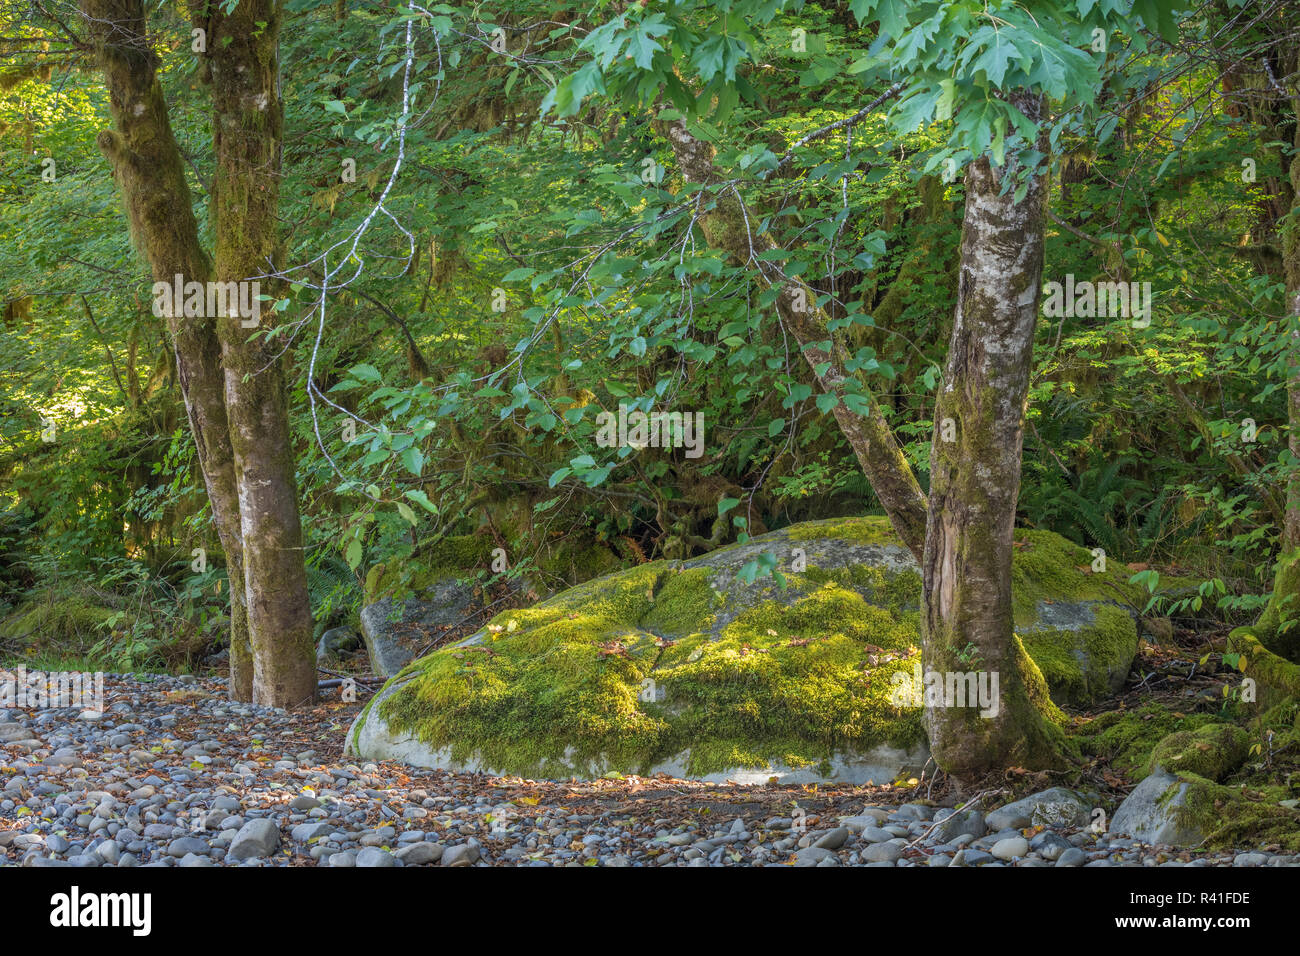 USA, Washington State, Olympic National Park. Alder trees and mossy boulder. Stock Photo